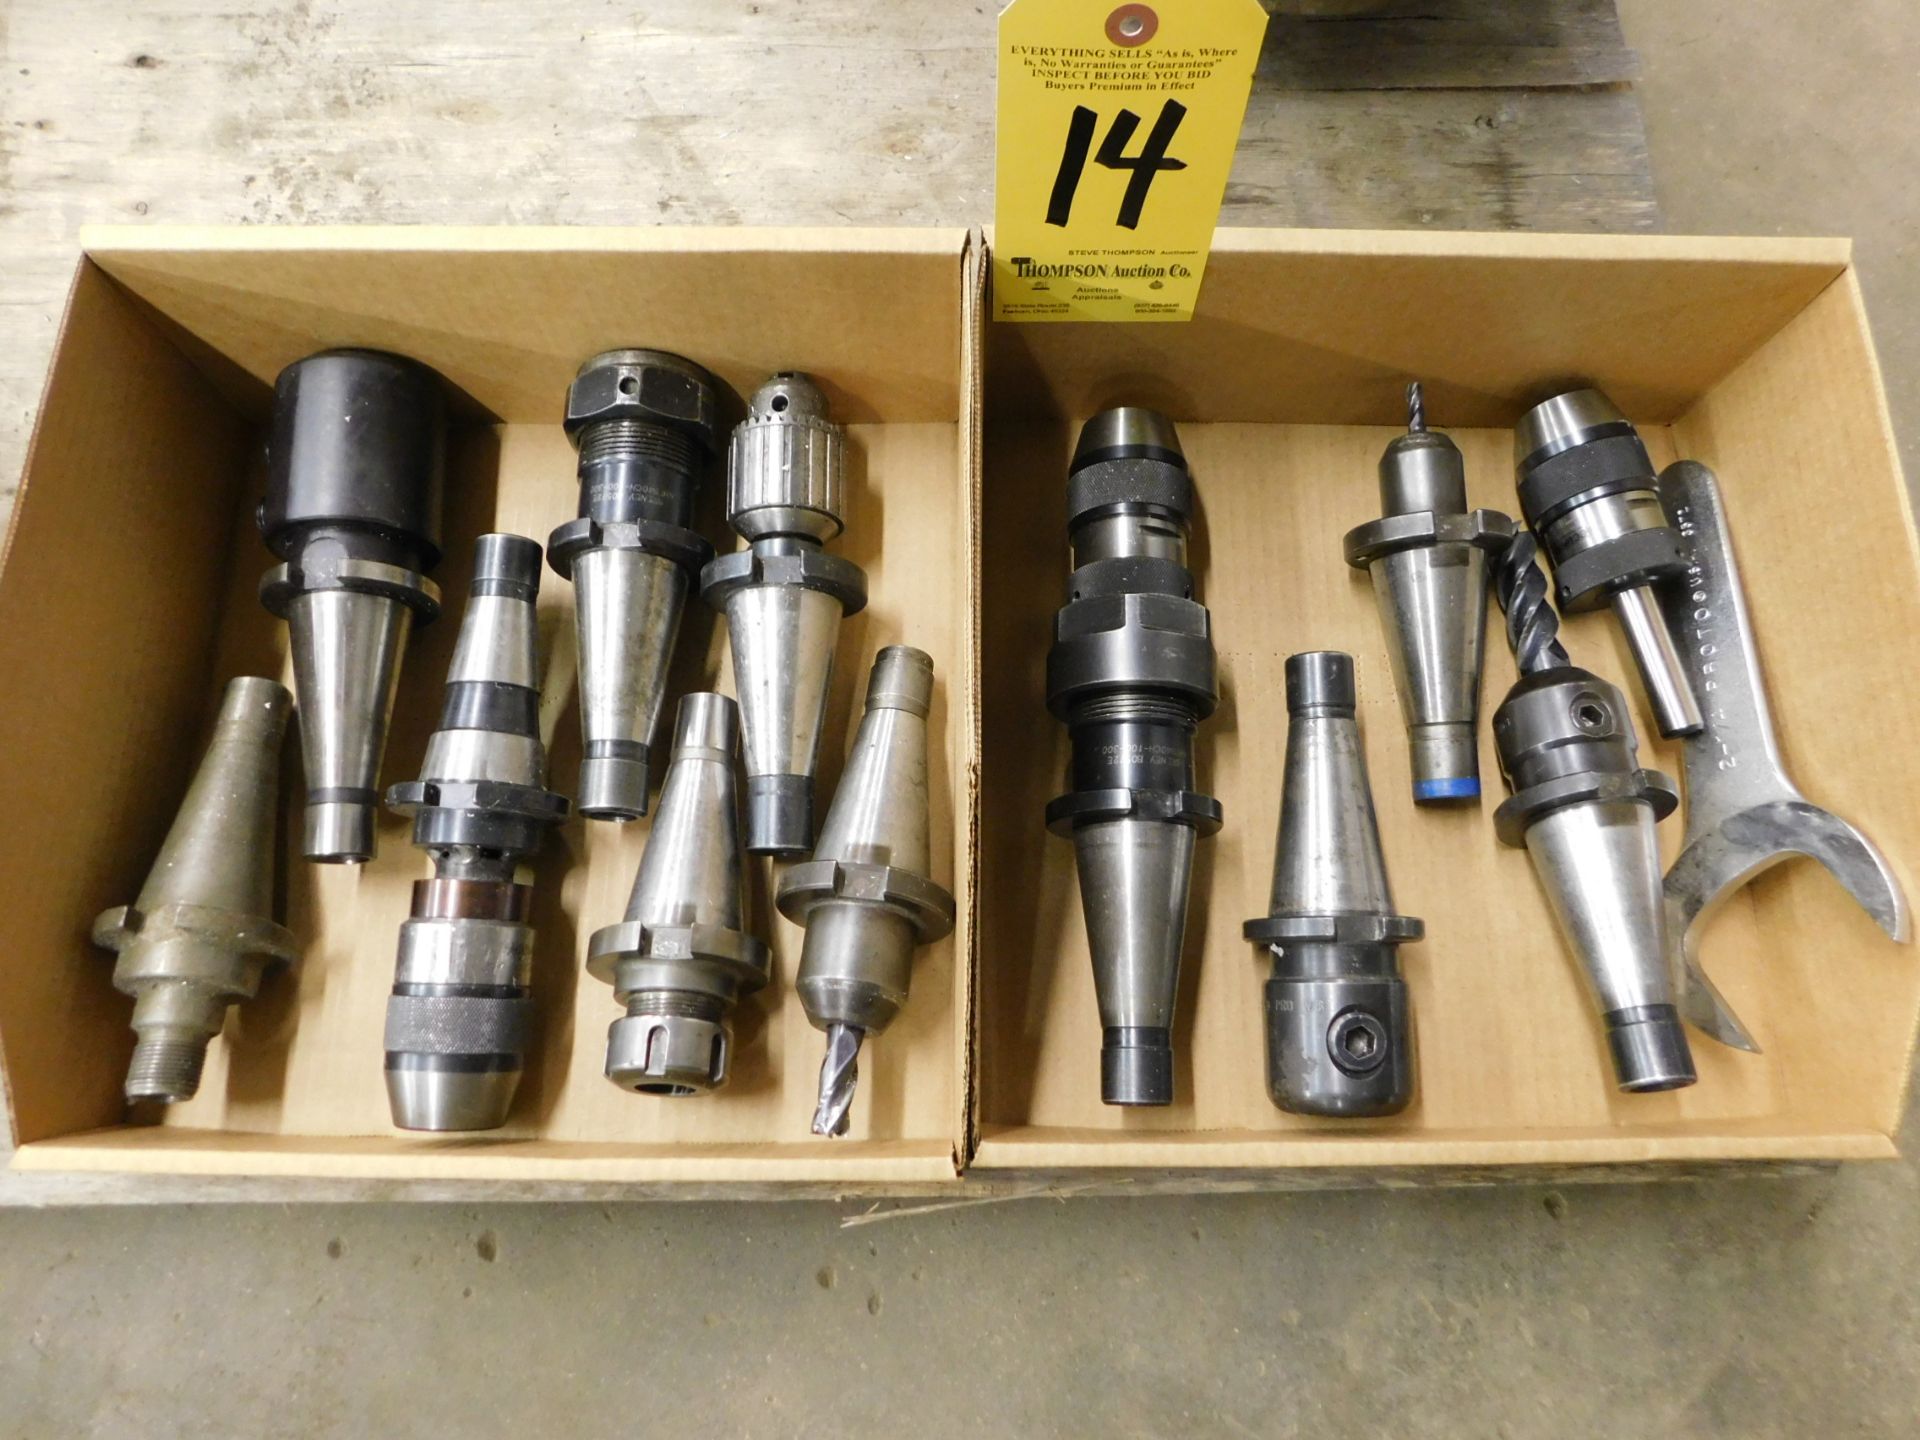 40 Taper Toolholders, Lot Location: 301 Poor Dr., Warsaw, IN, 46580